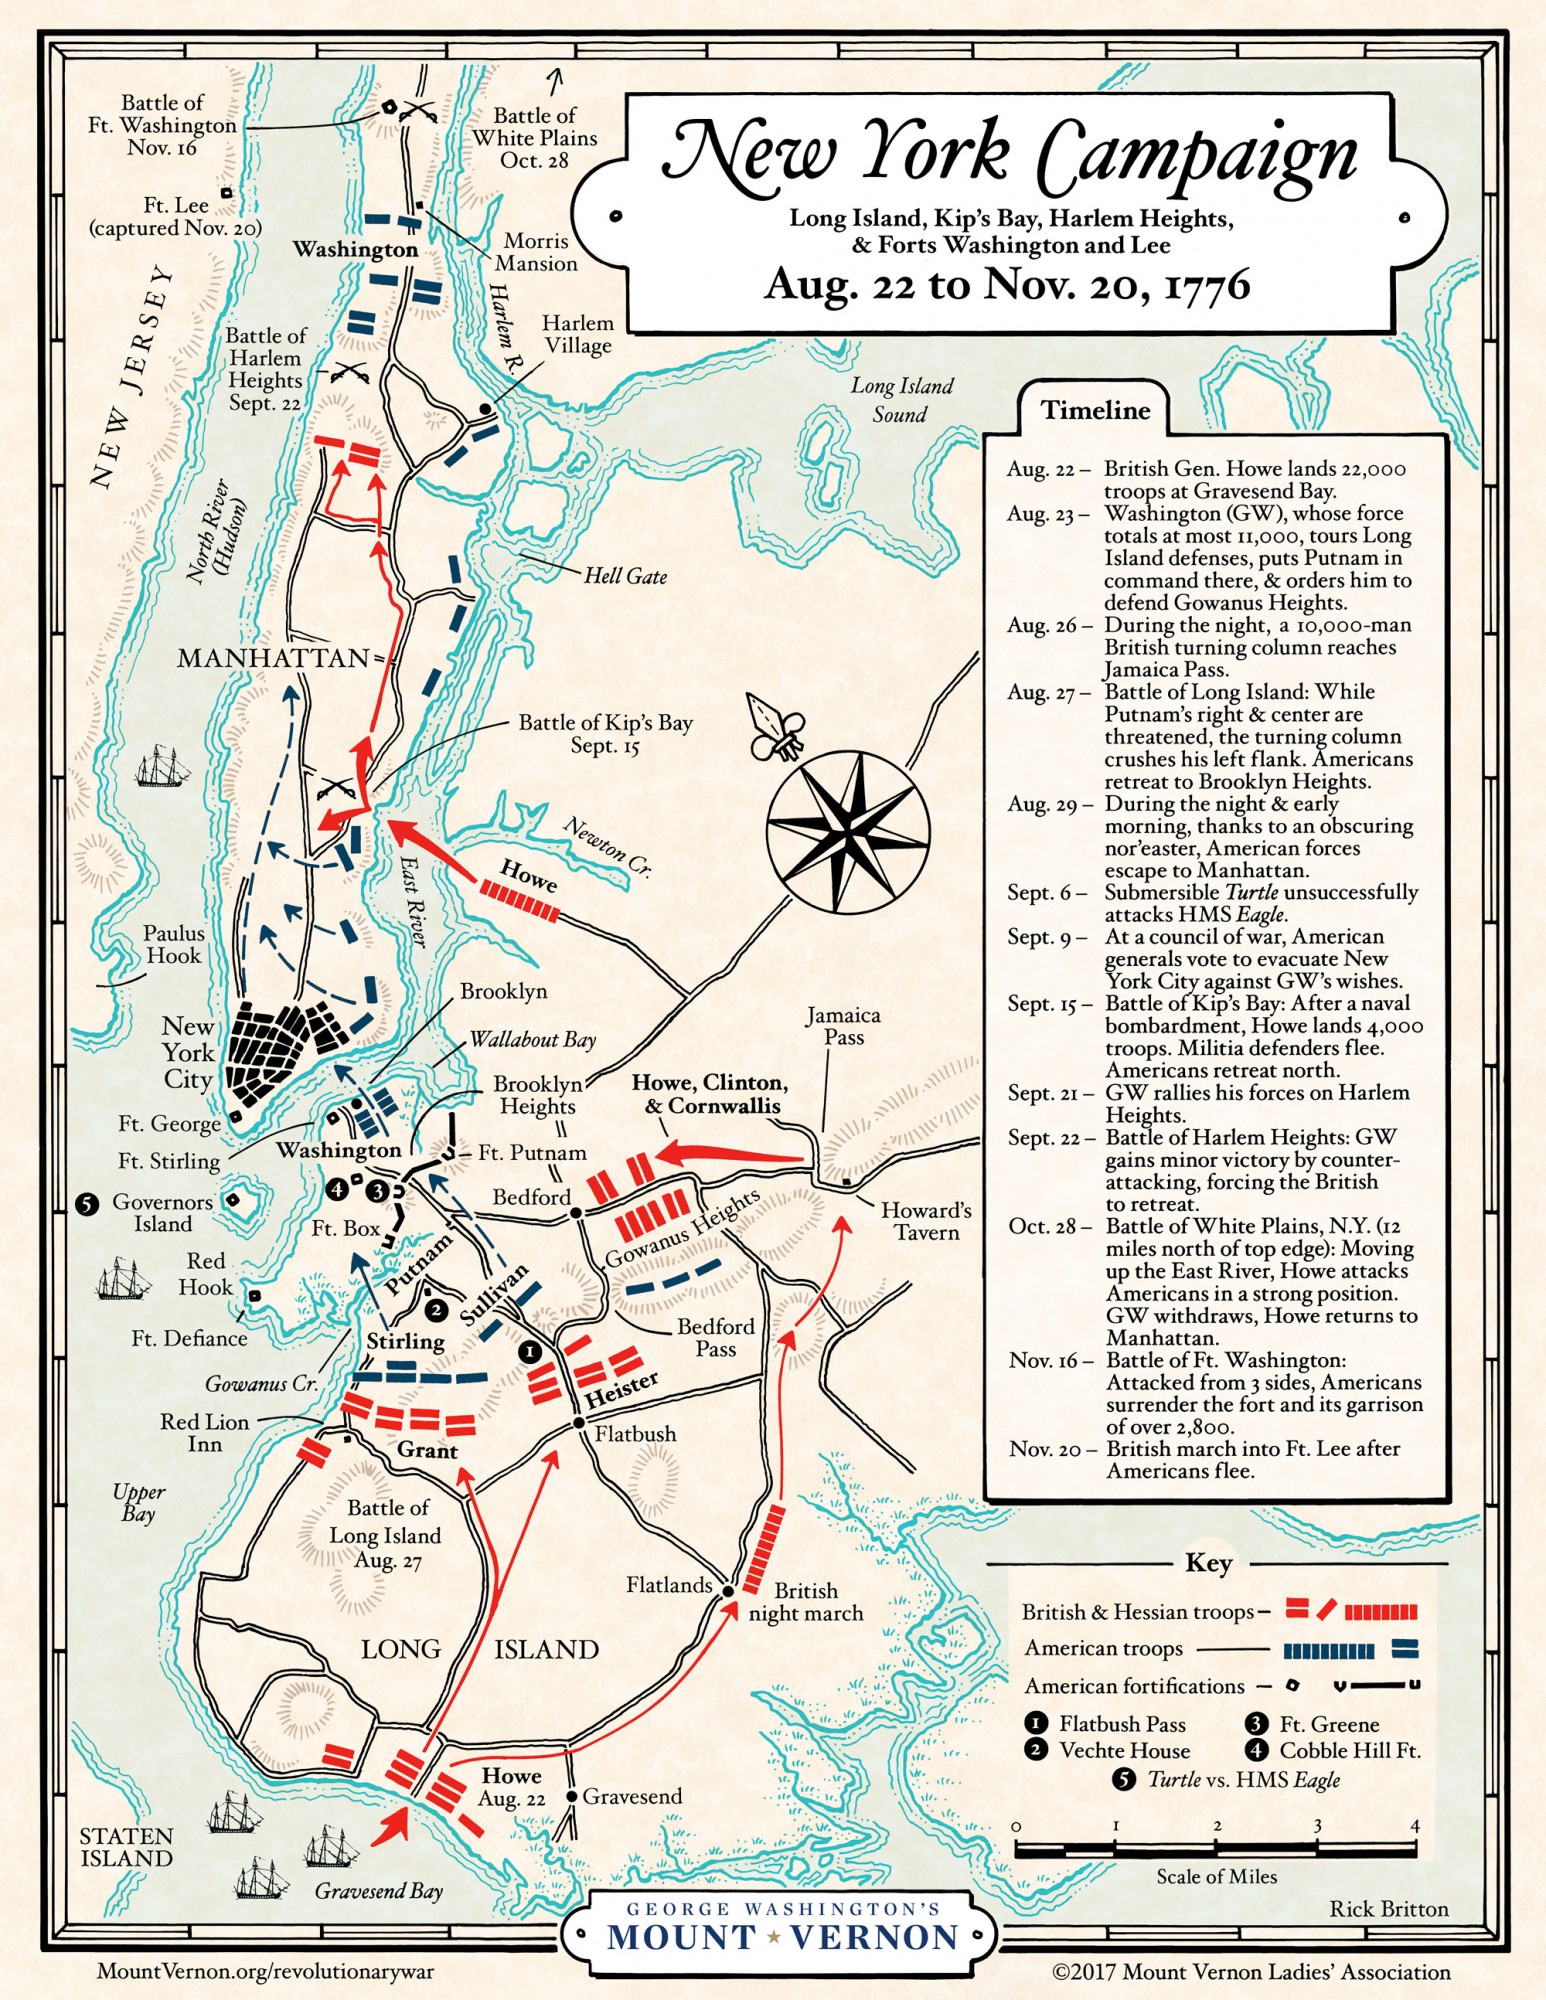 Map of the New York Campaign of the American Revolutionary War, August to November 1776